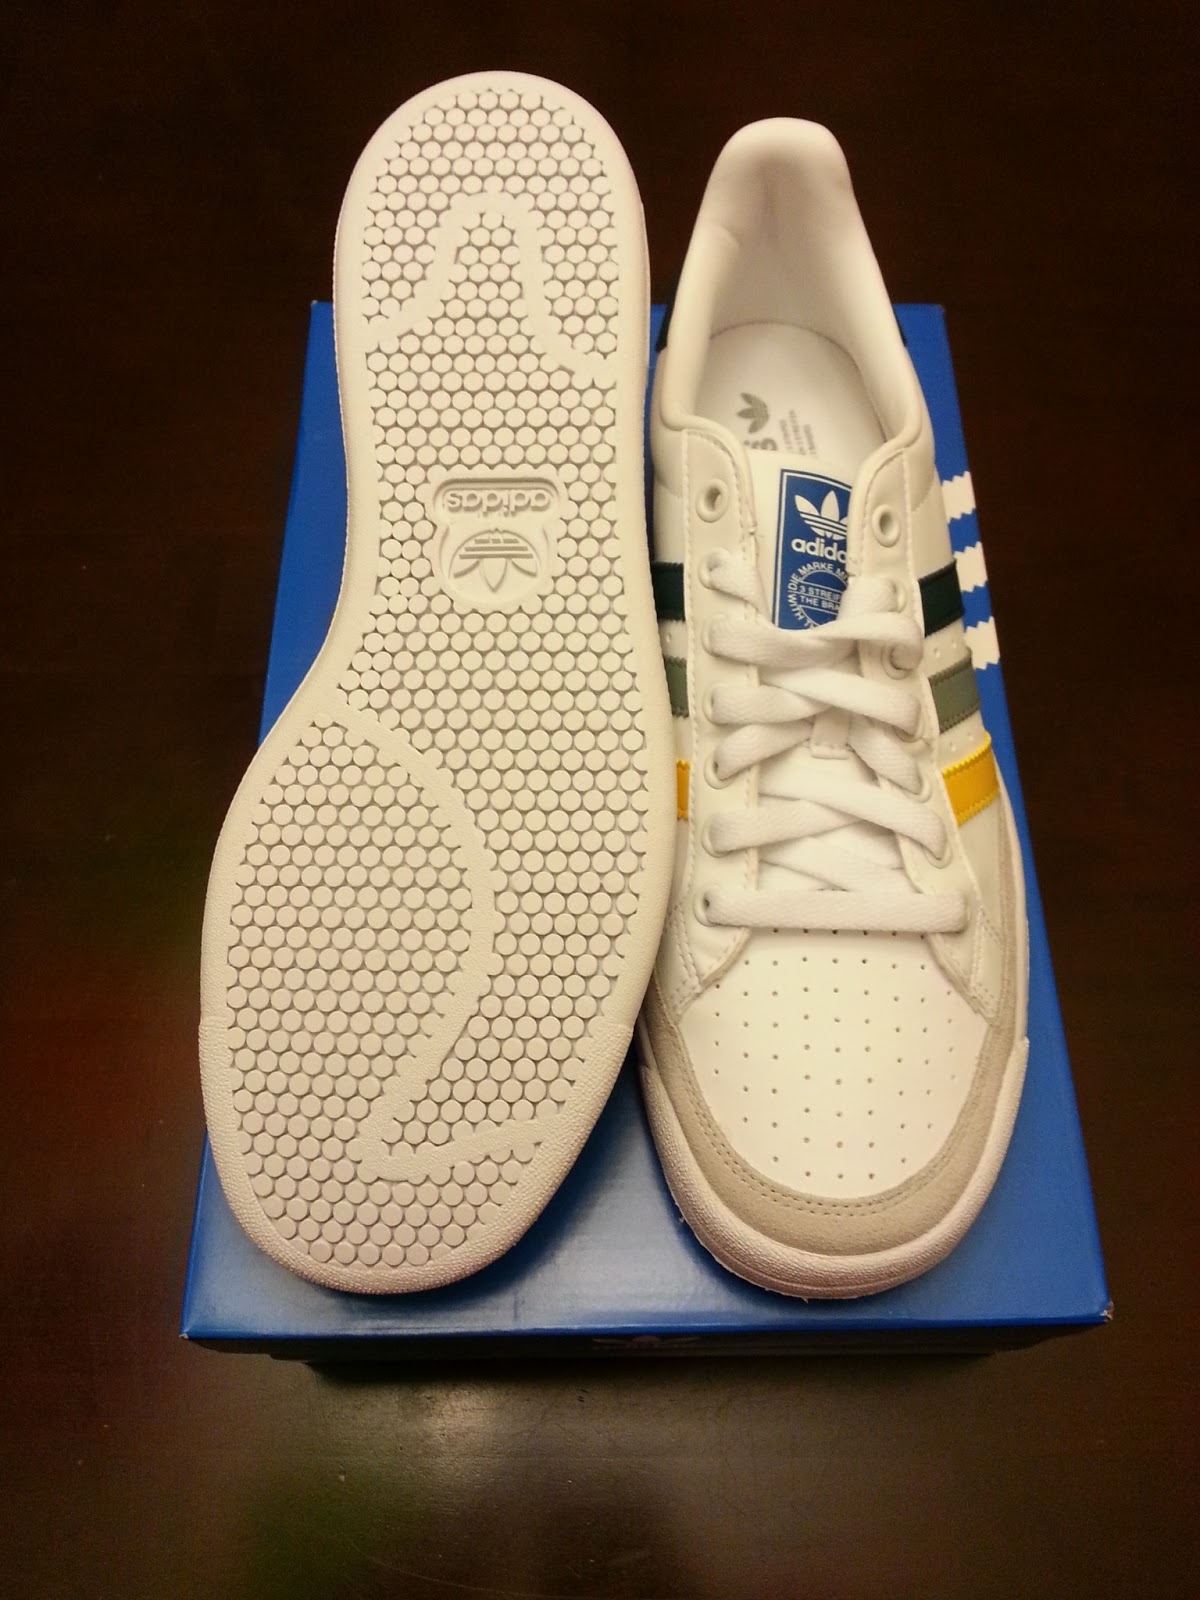 Adidas Collection: Adidas Orignals Tennis Pro in White and Yellow, Grey